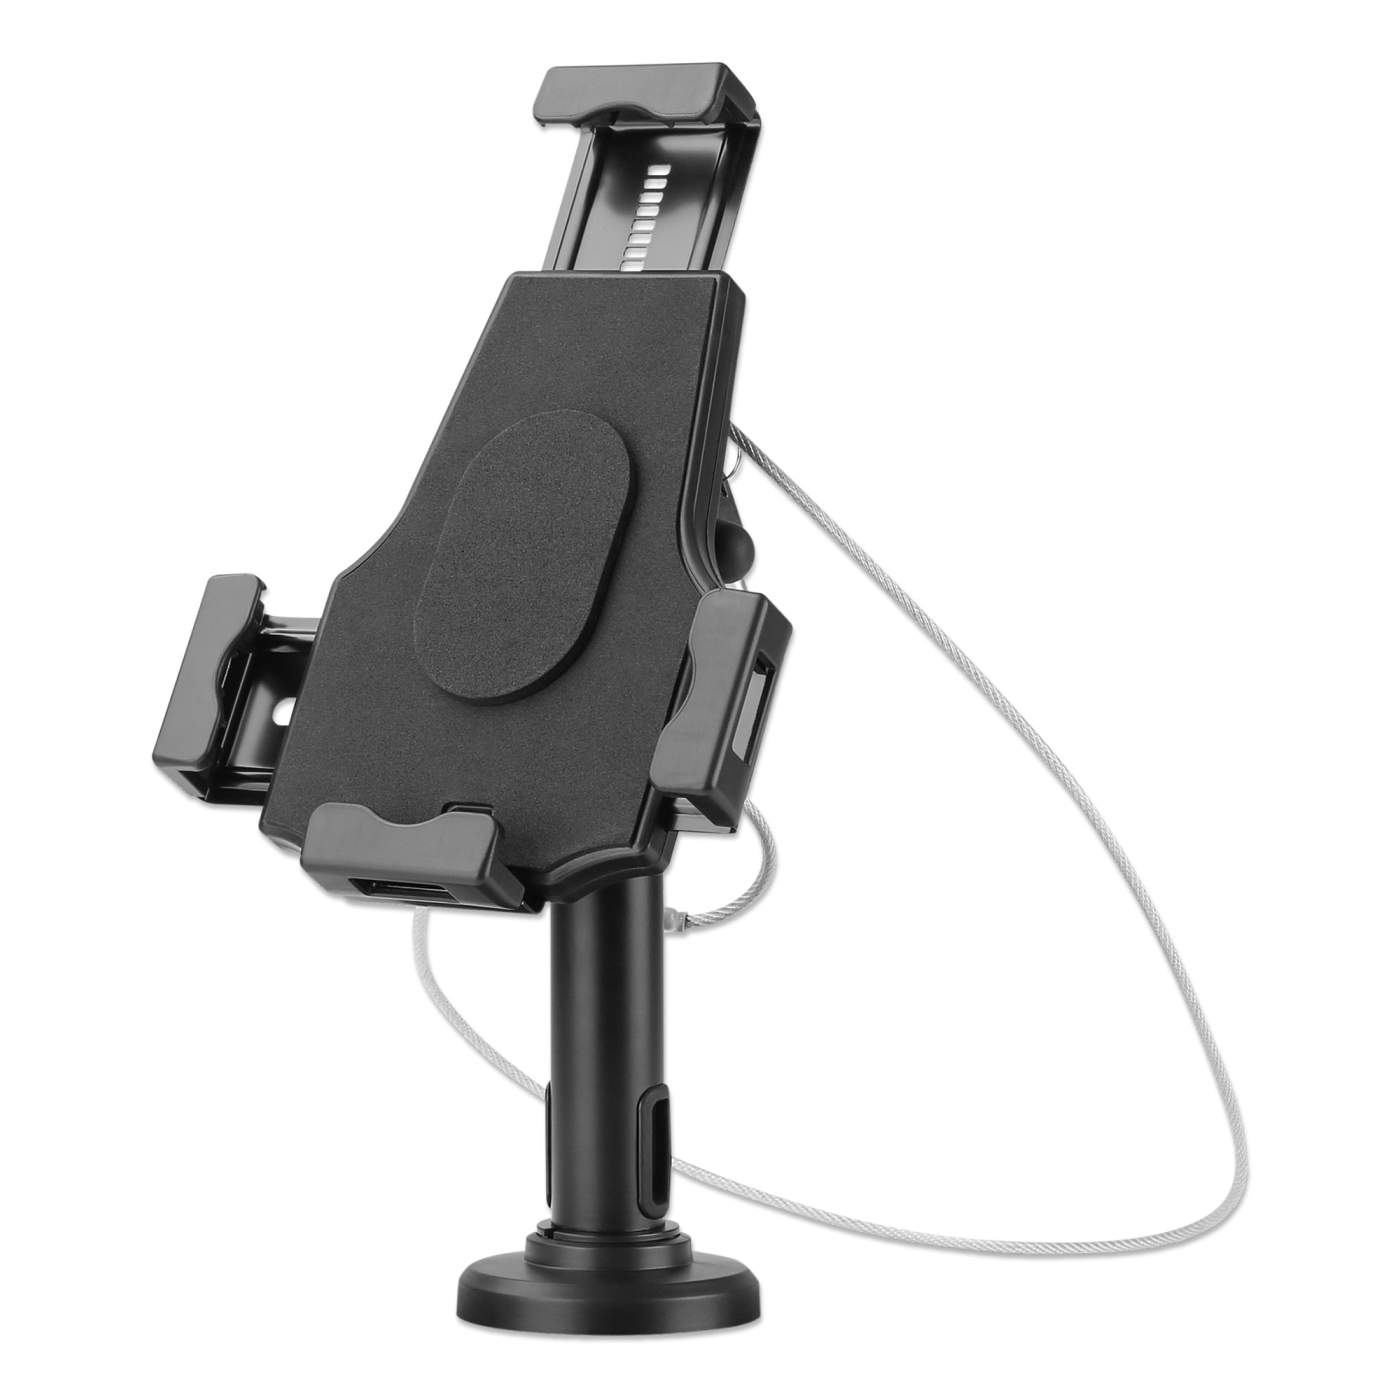 Single Bolt Mounting Bracket for Monitor or iPad